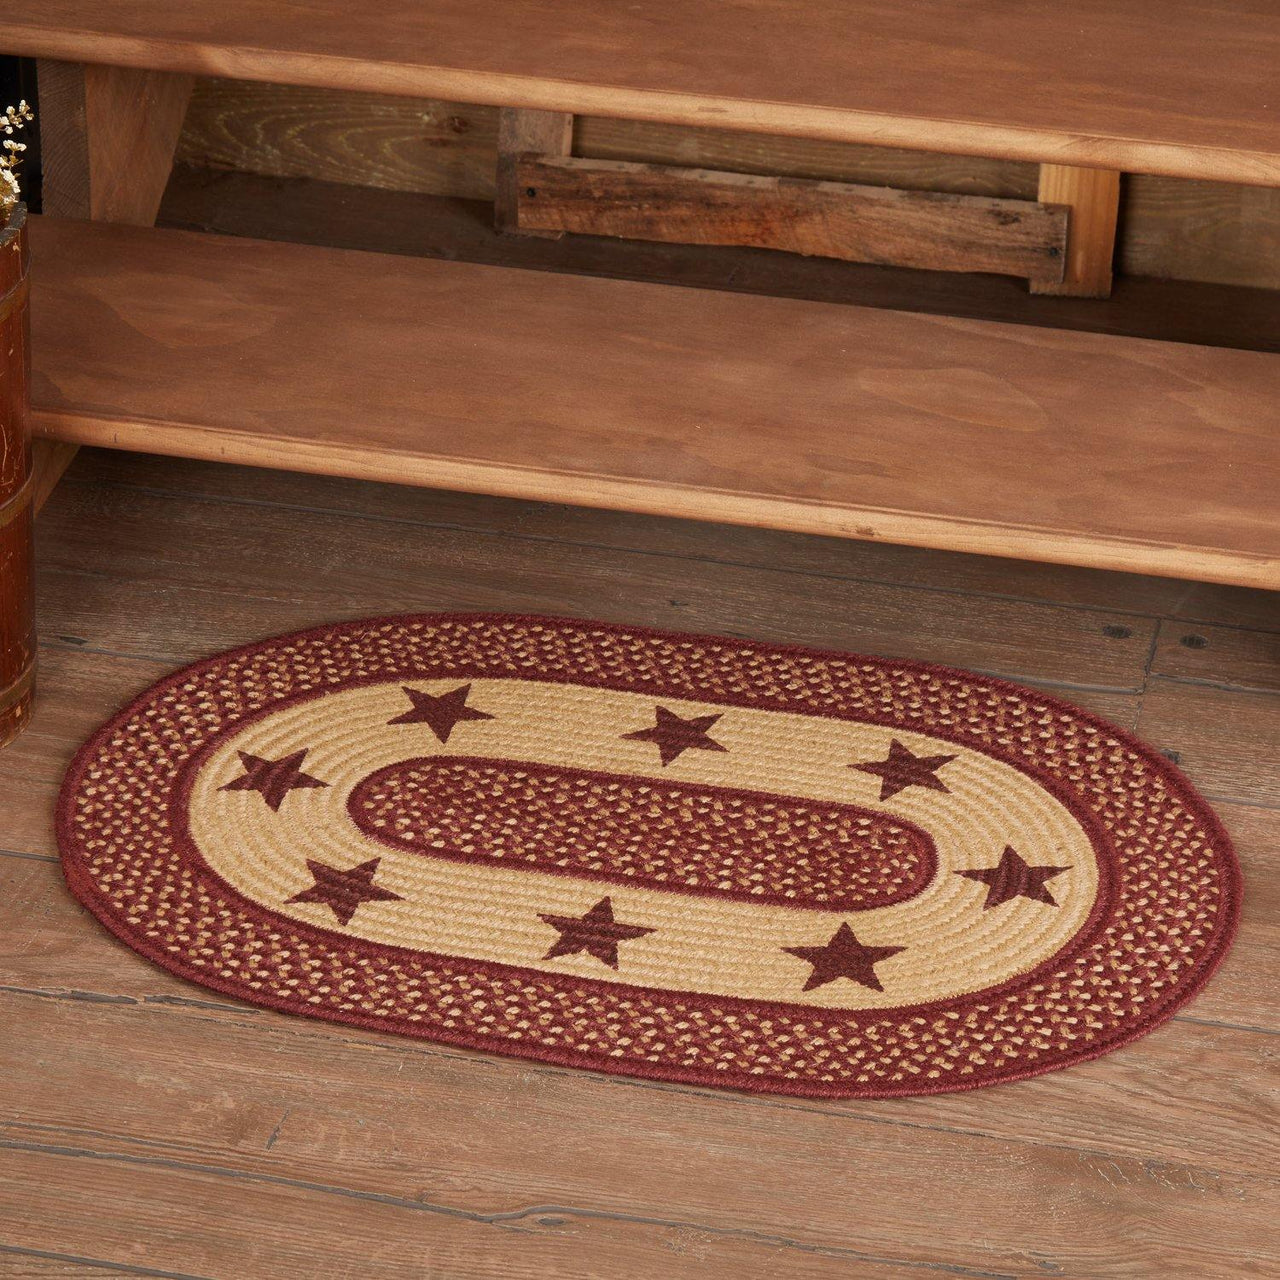 Burgundy Red Primitive Jute Braided Rug Oval Stencil Stars 20"x30" with Rug Pad VHC Brands - The Fox Decor